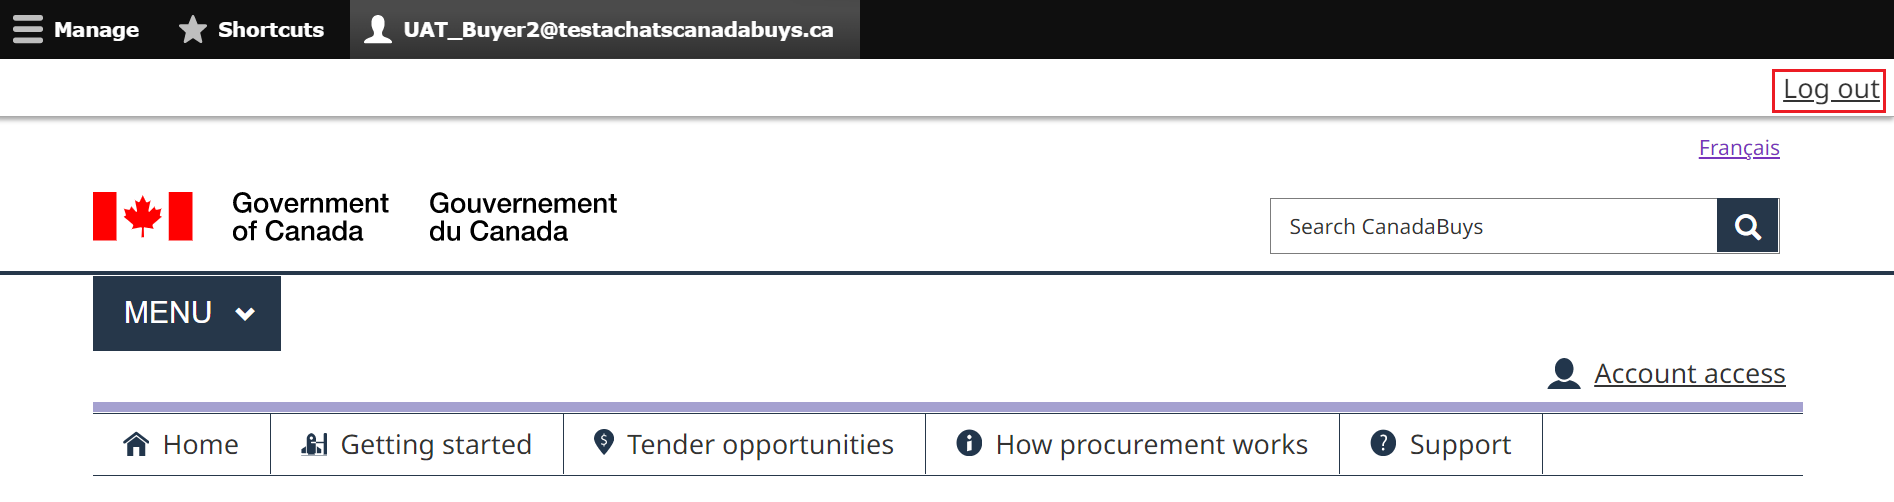 A screenshot of the CanadaBuys homepage, with the Log out button highlighted.